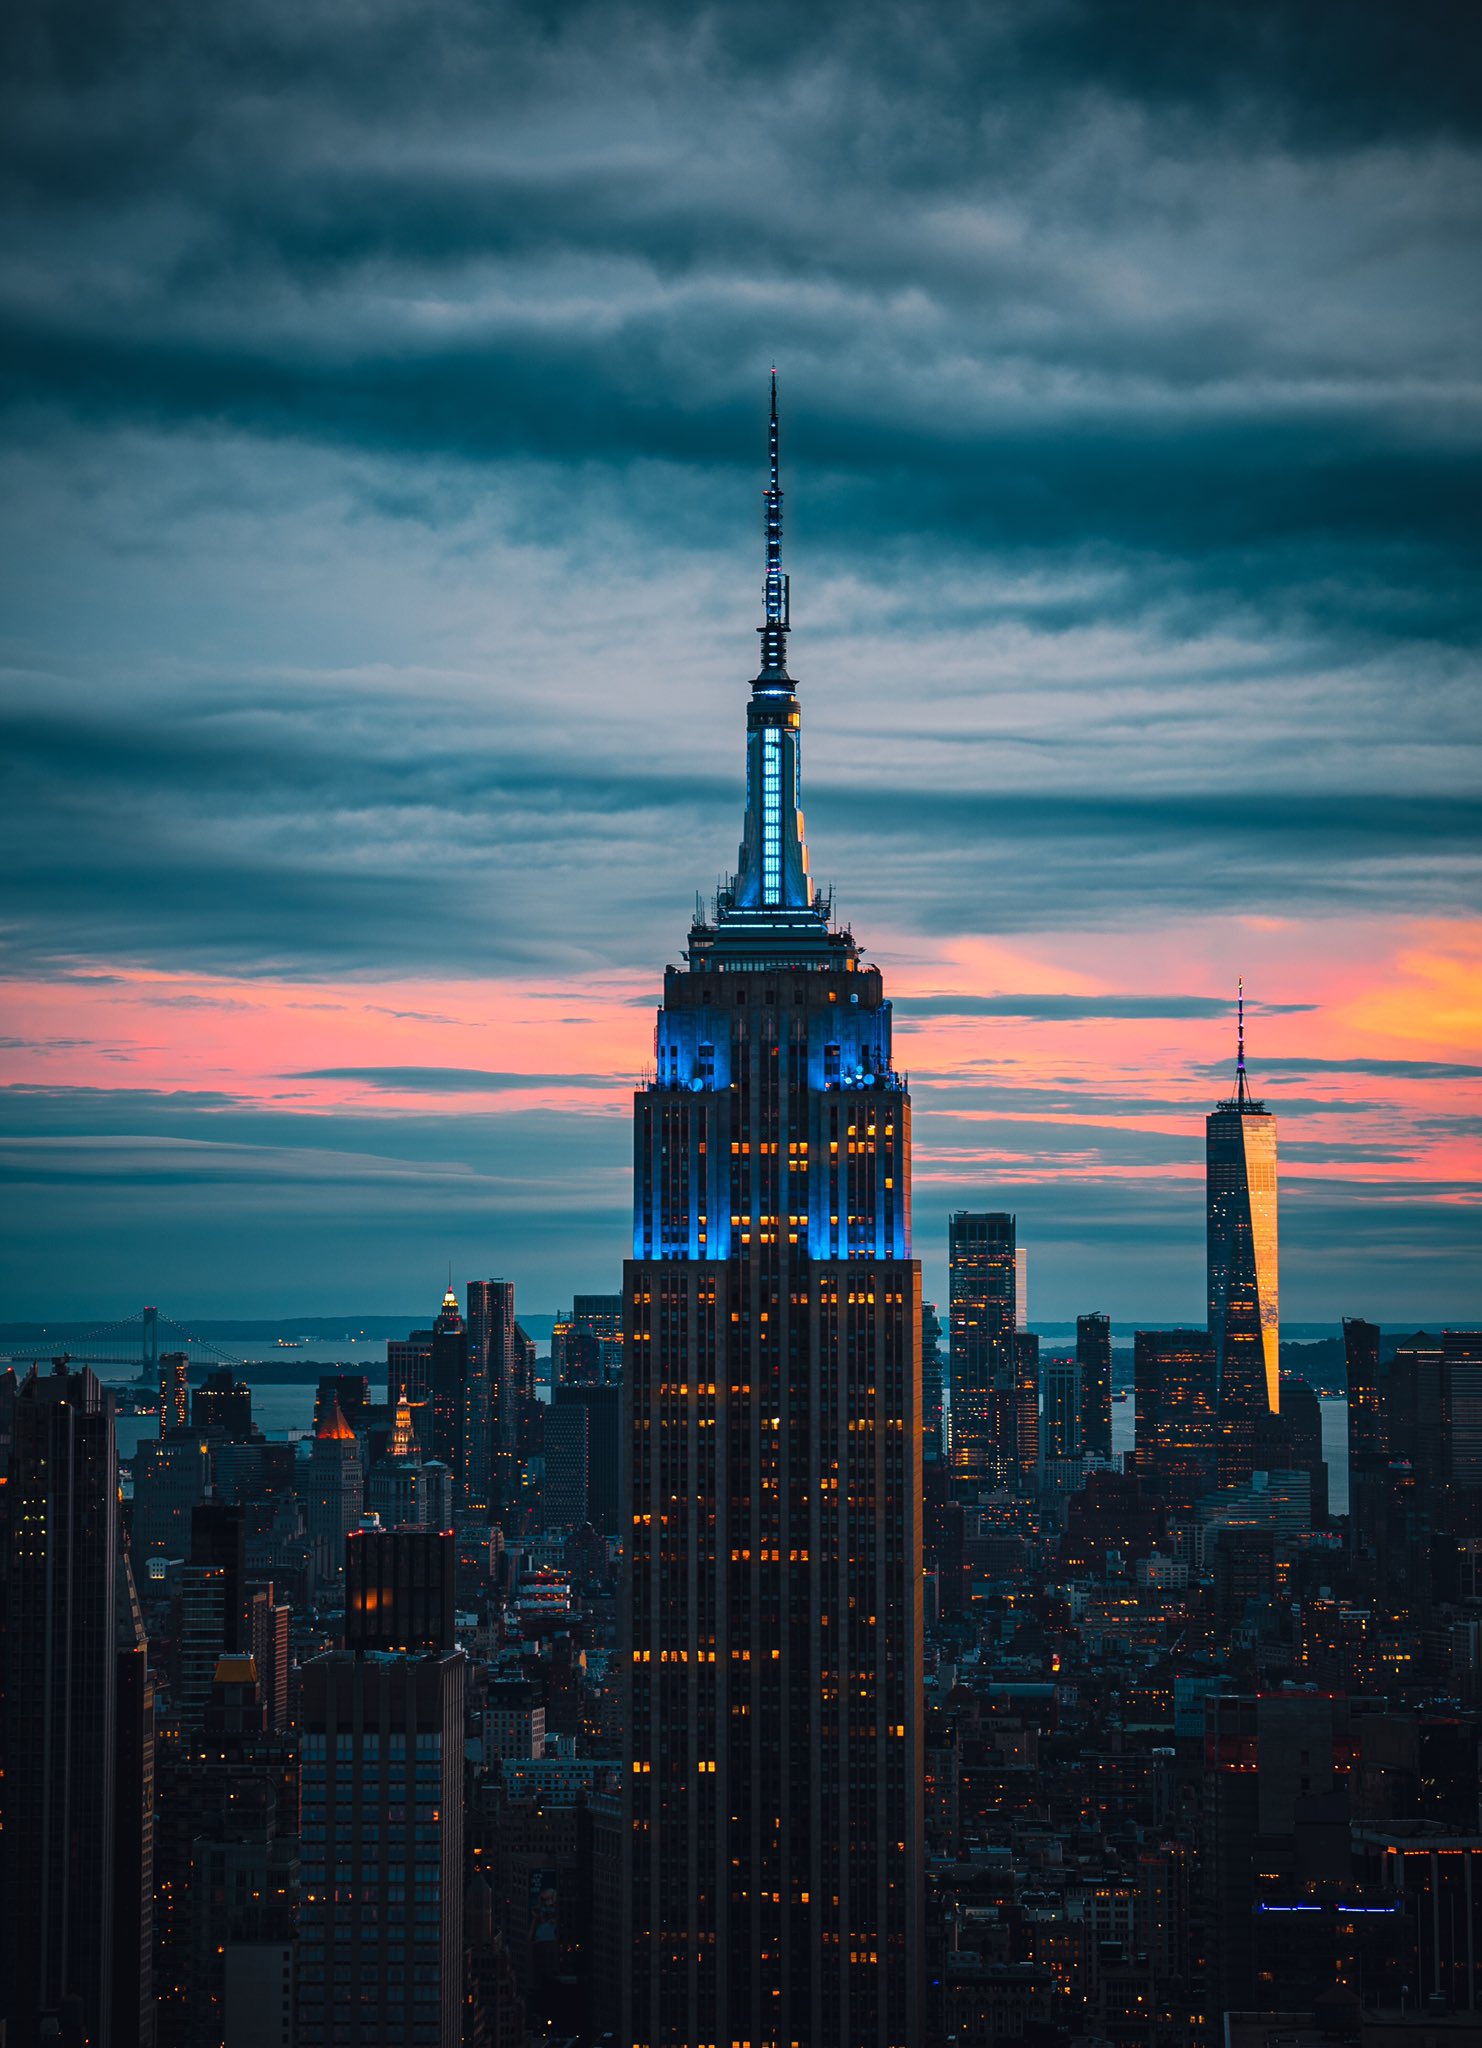 New York City Sky Sunset Clouds Portrait Display Building Empire State Building City Lights 1482x2048